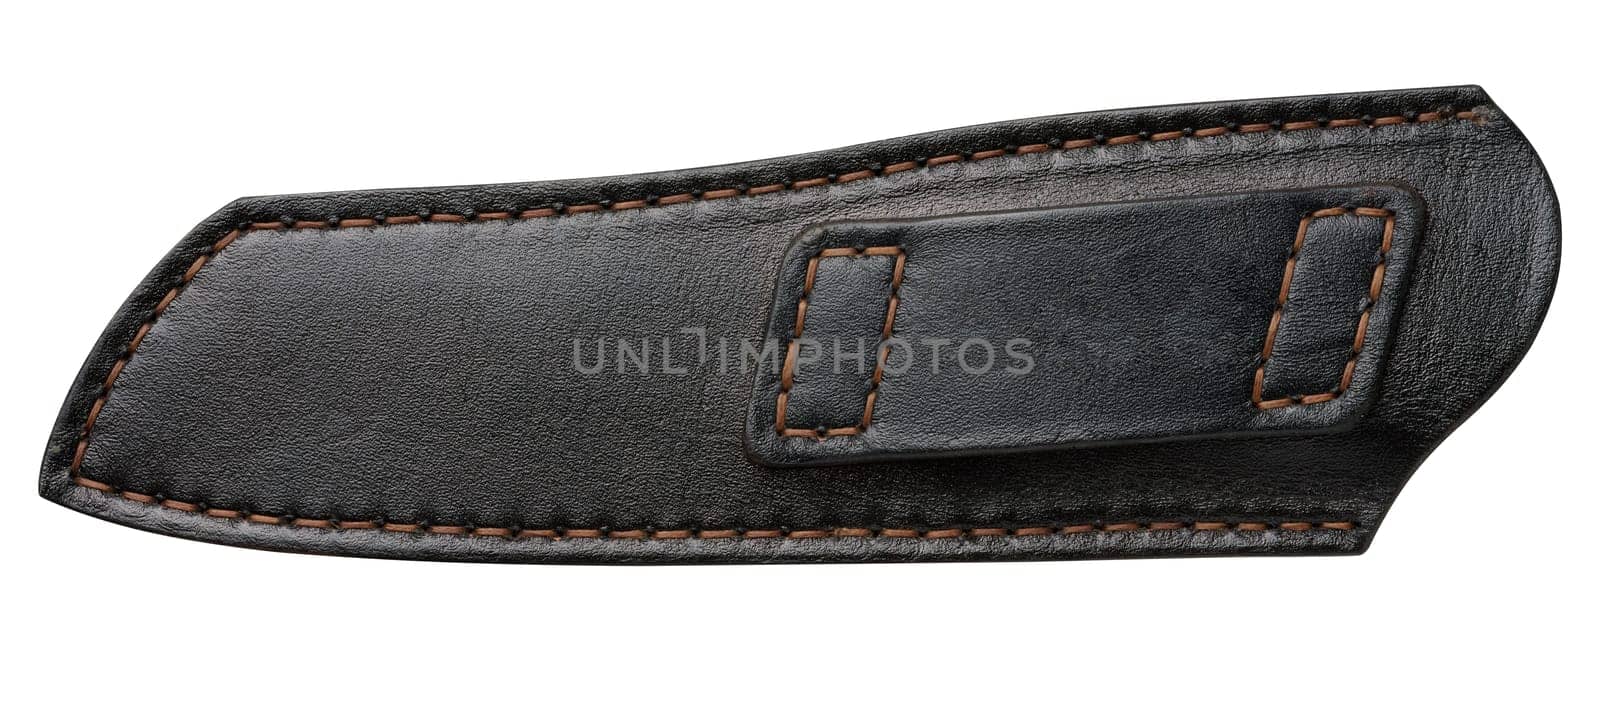 Black leather sheath for a knife on a white isolated background, close up